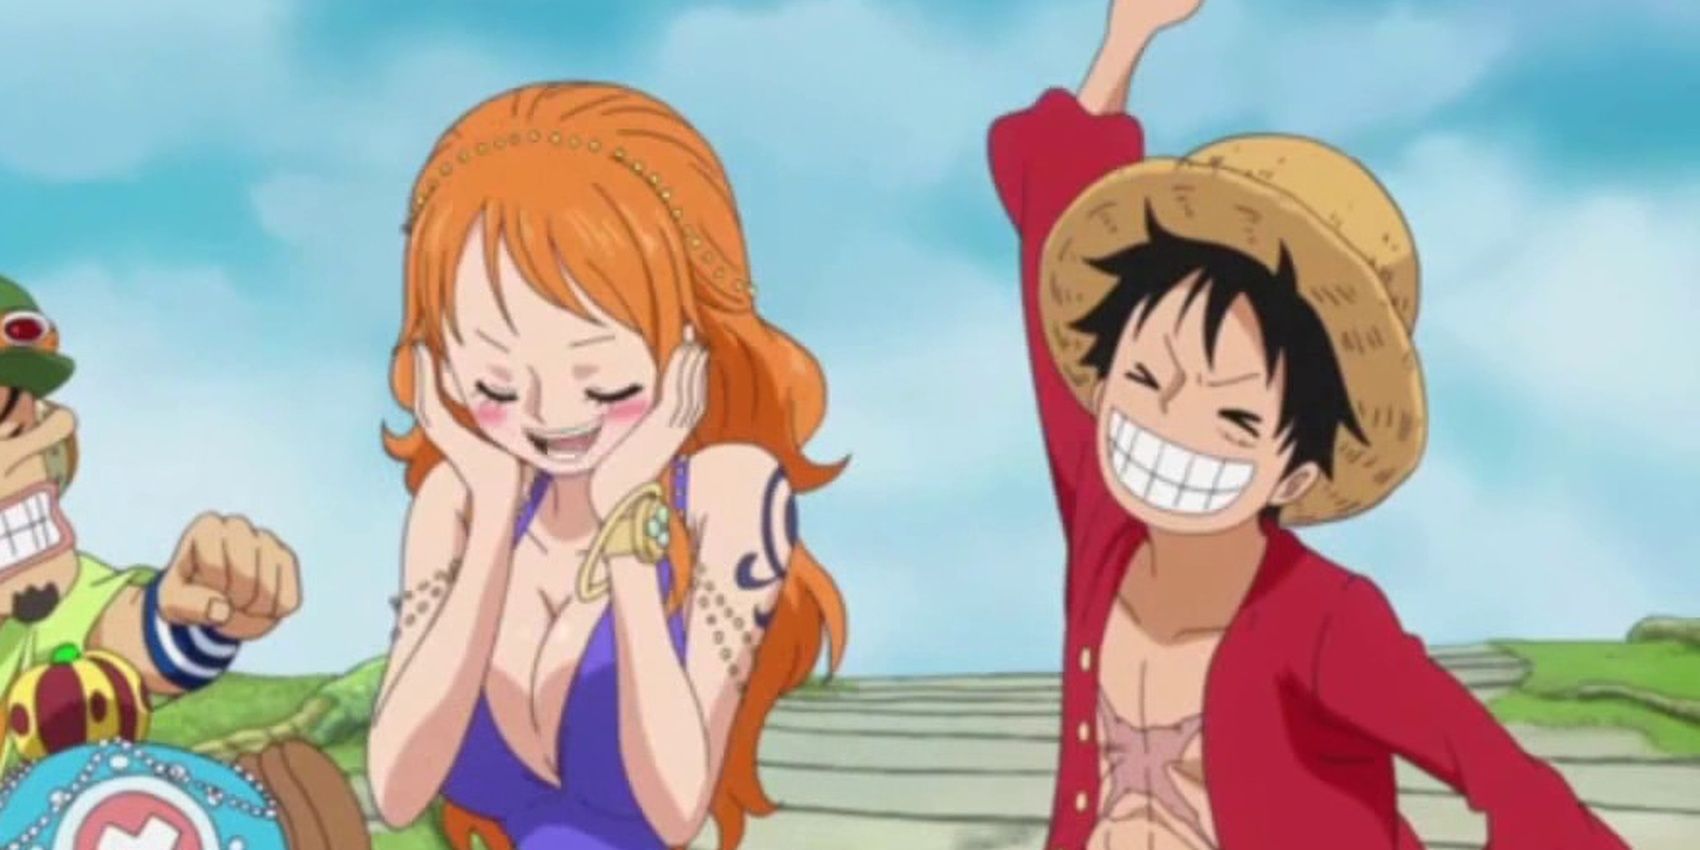 Nami blushes as Luffy grins behind her in One Piece